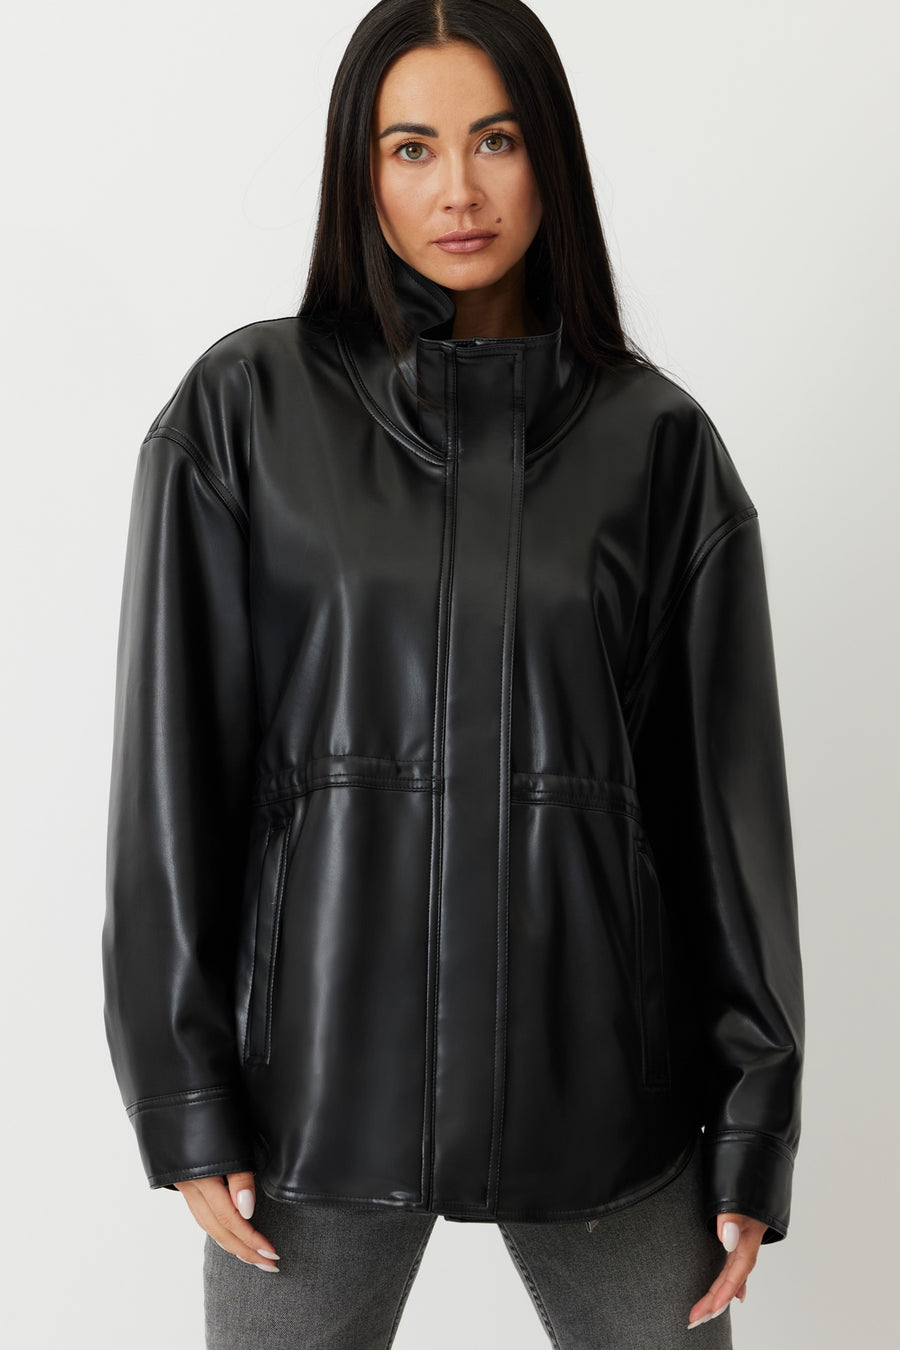 THE PRYCE ETHICAL LEATHER PARKA - BLACK